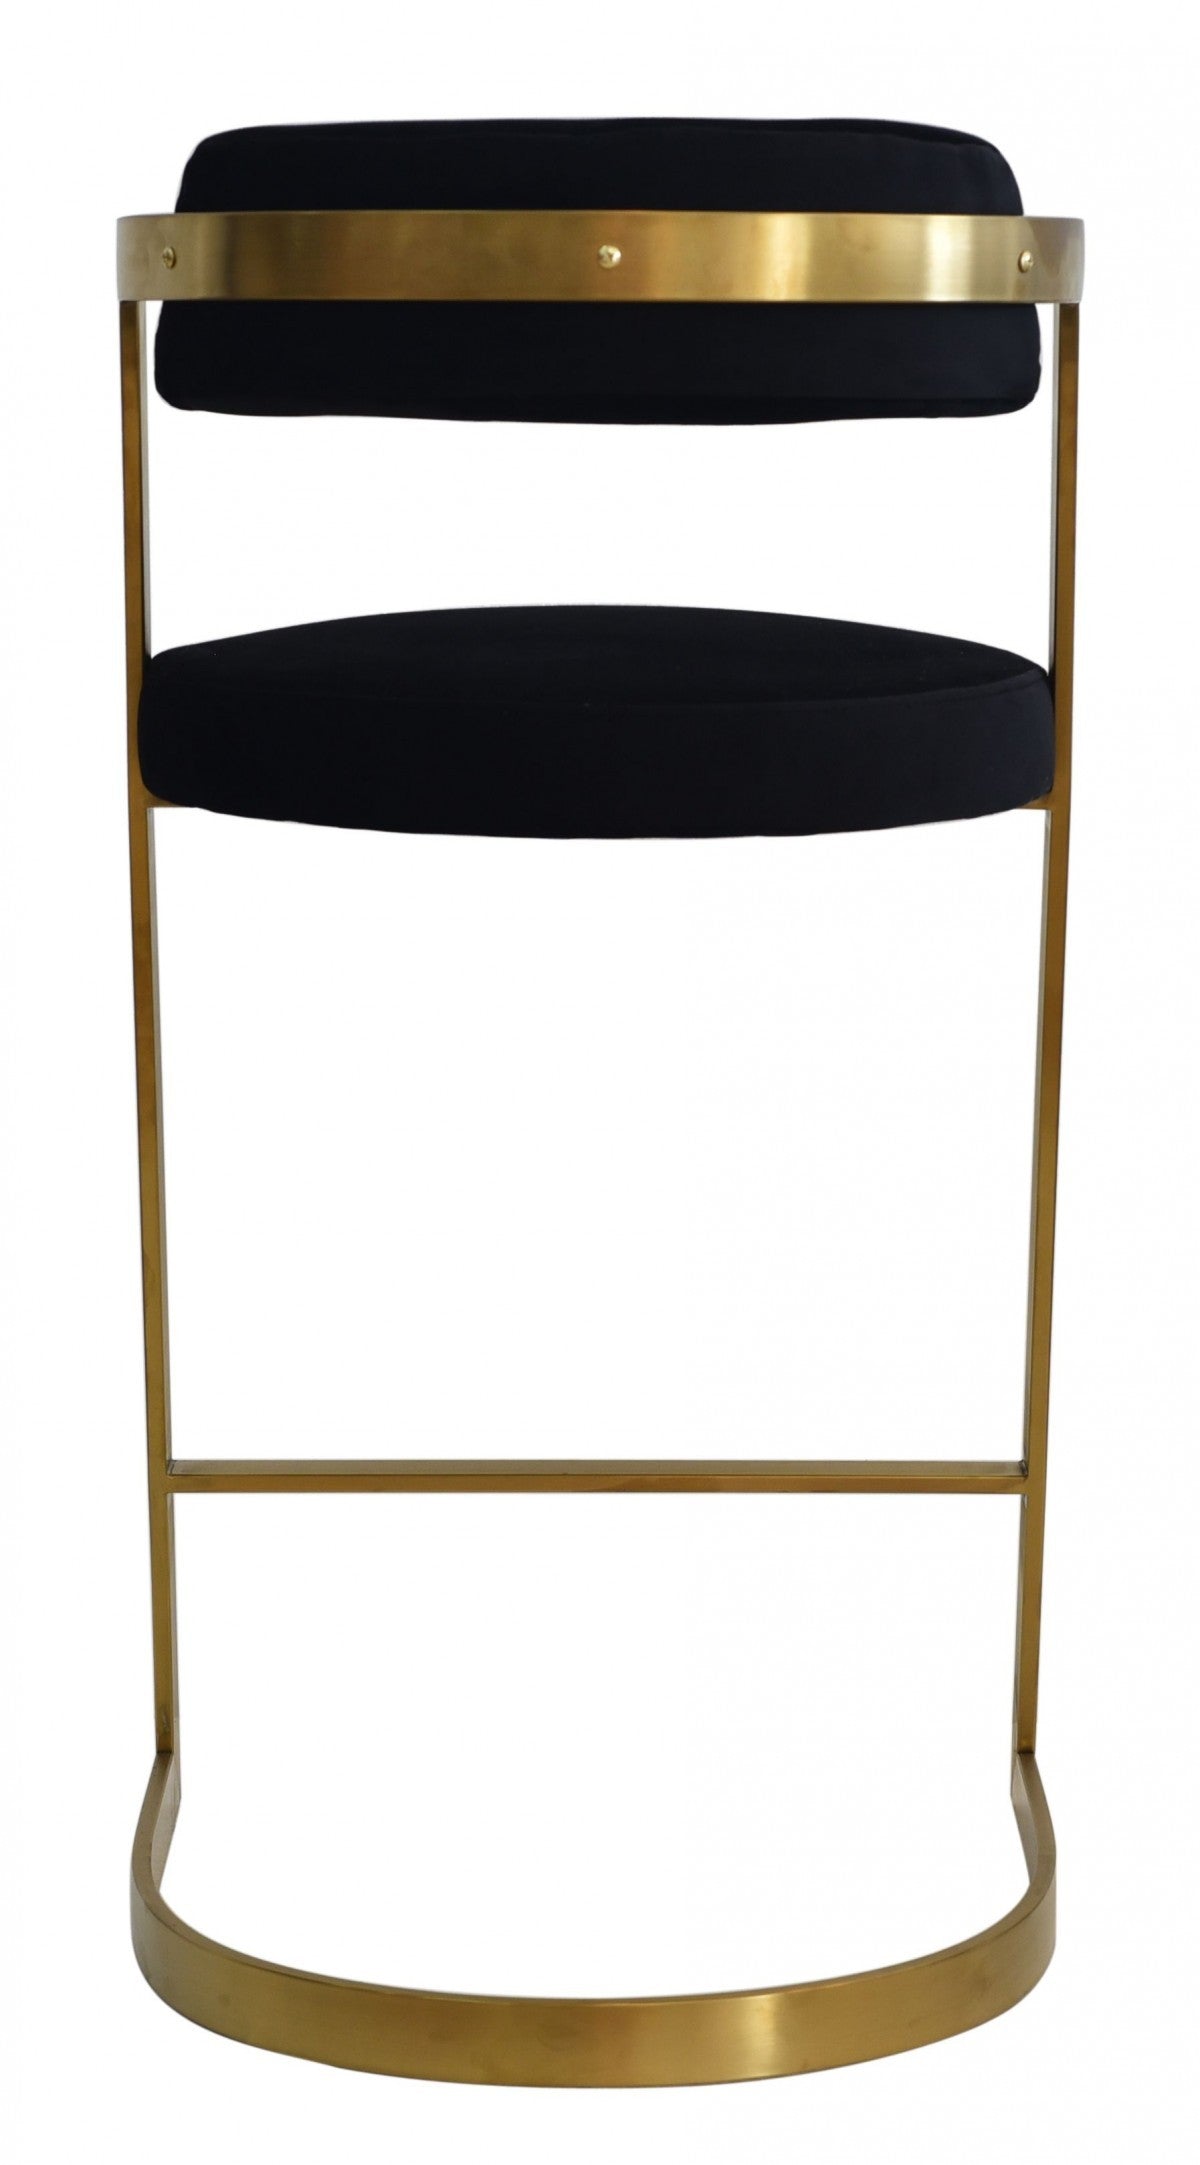 26" Black And Gold Velvet And Stainless Steel Low Back Counter Height Bar Chair With Footrest By Homeroots